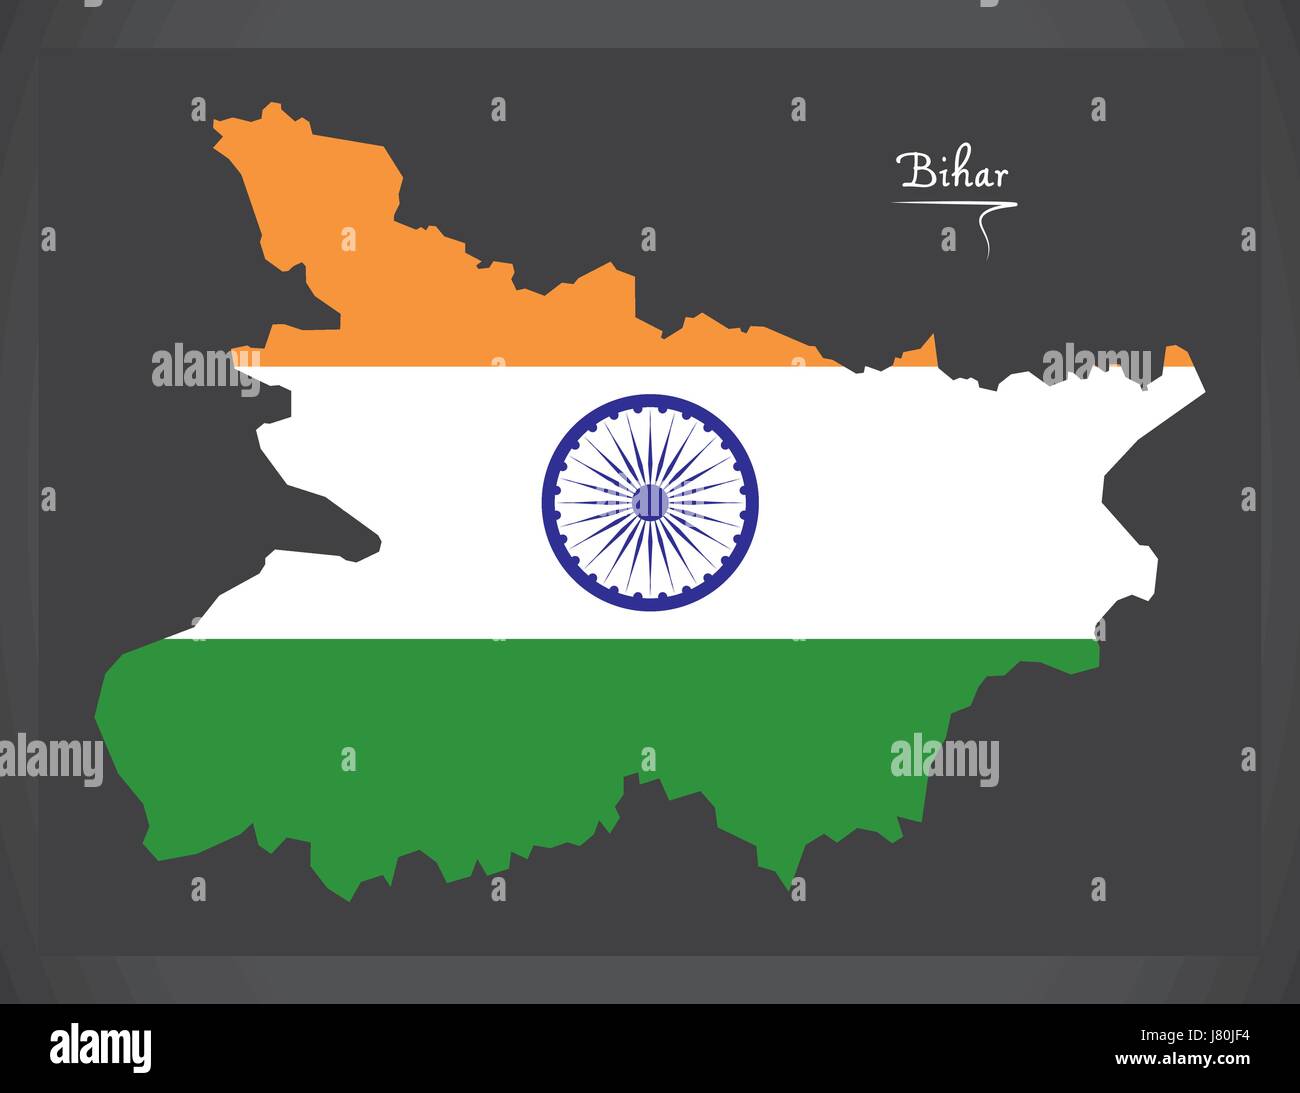 Bihar map with Indian national flag illustration Stock Vector